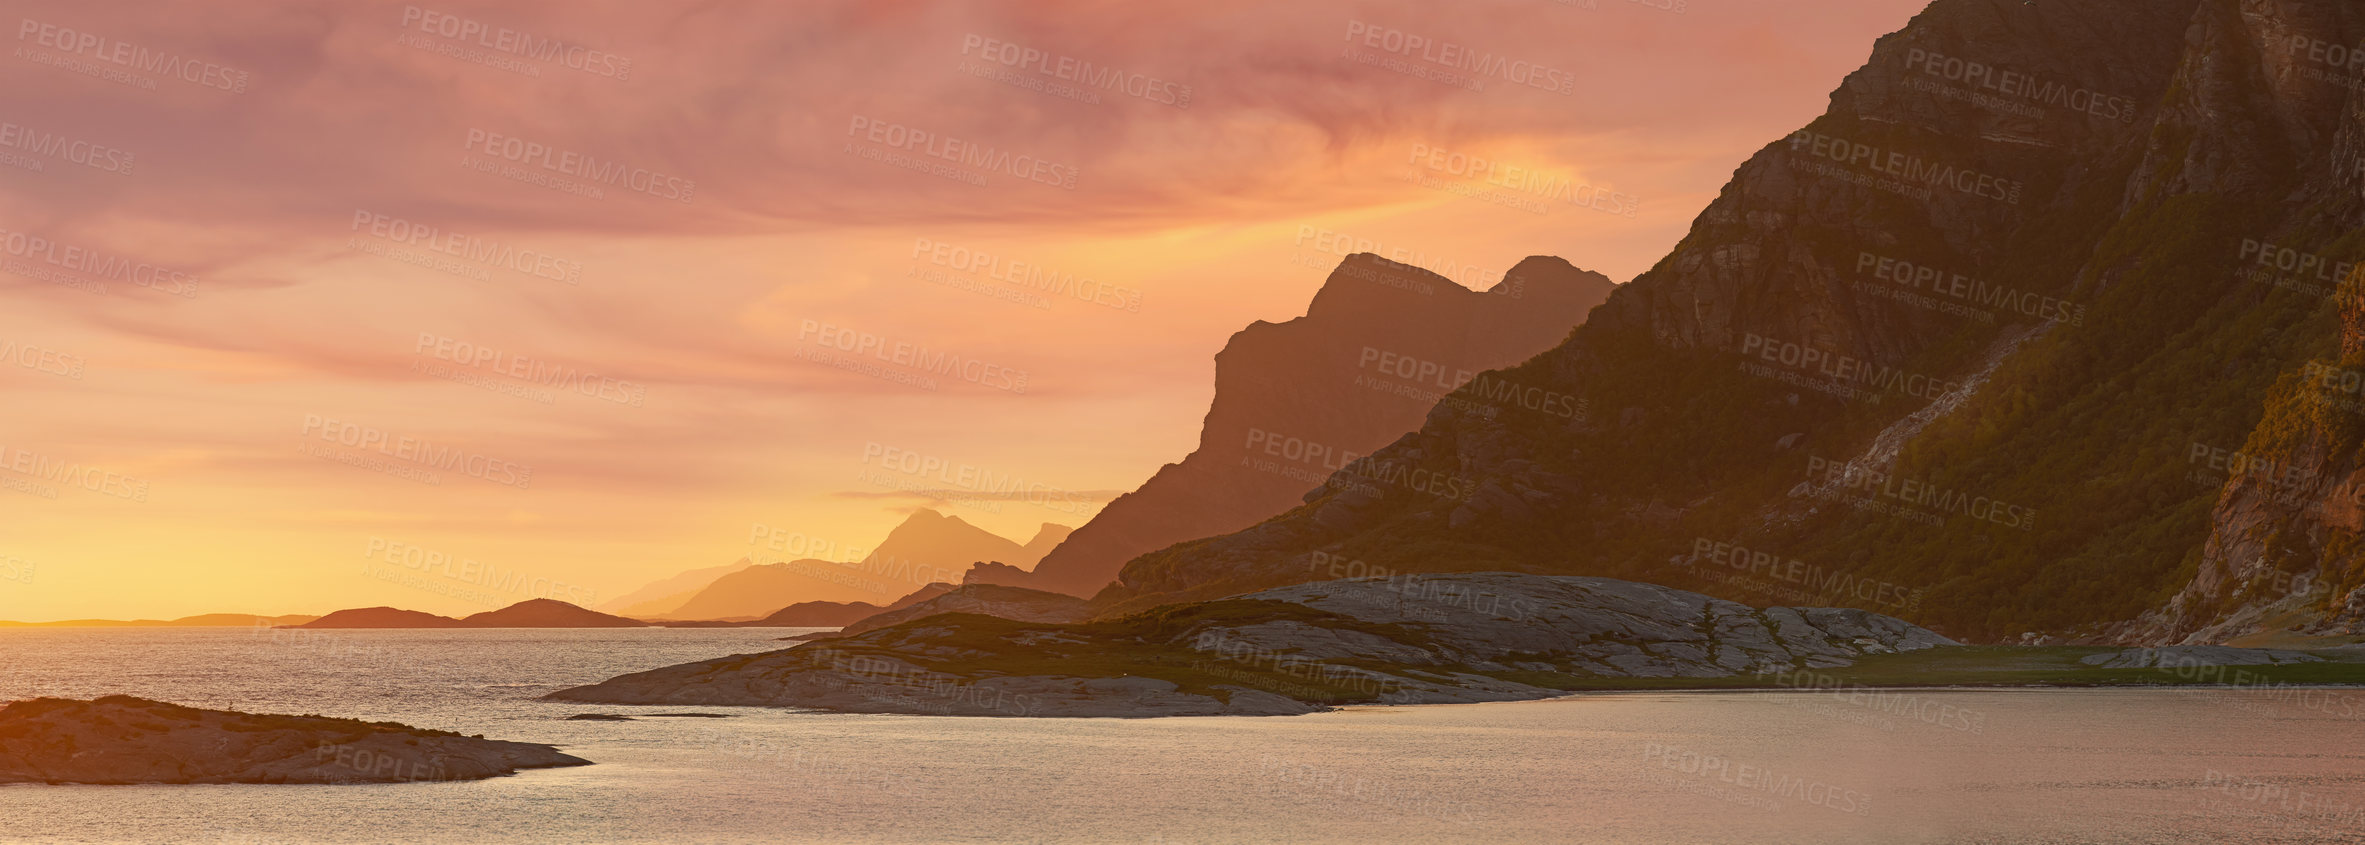 Buy stock photo The coast at sunset surrounded by mountains in nature.
Beautiful empty landscape of still ocean water or a lake on a summer evening with rocks, shrubs and grass near the mountain side 